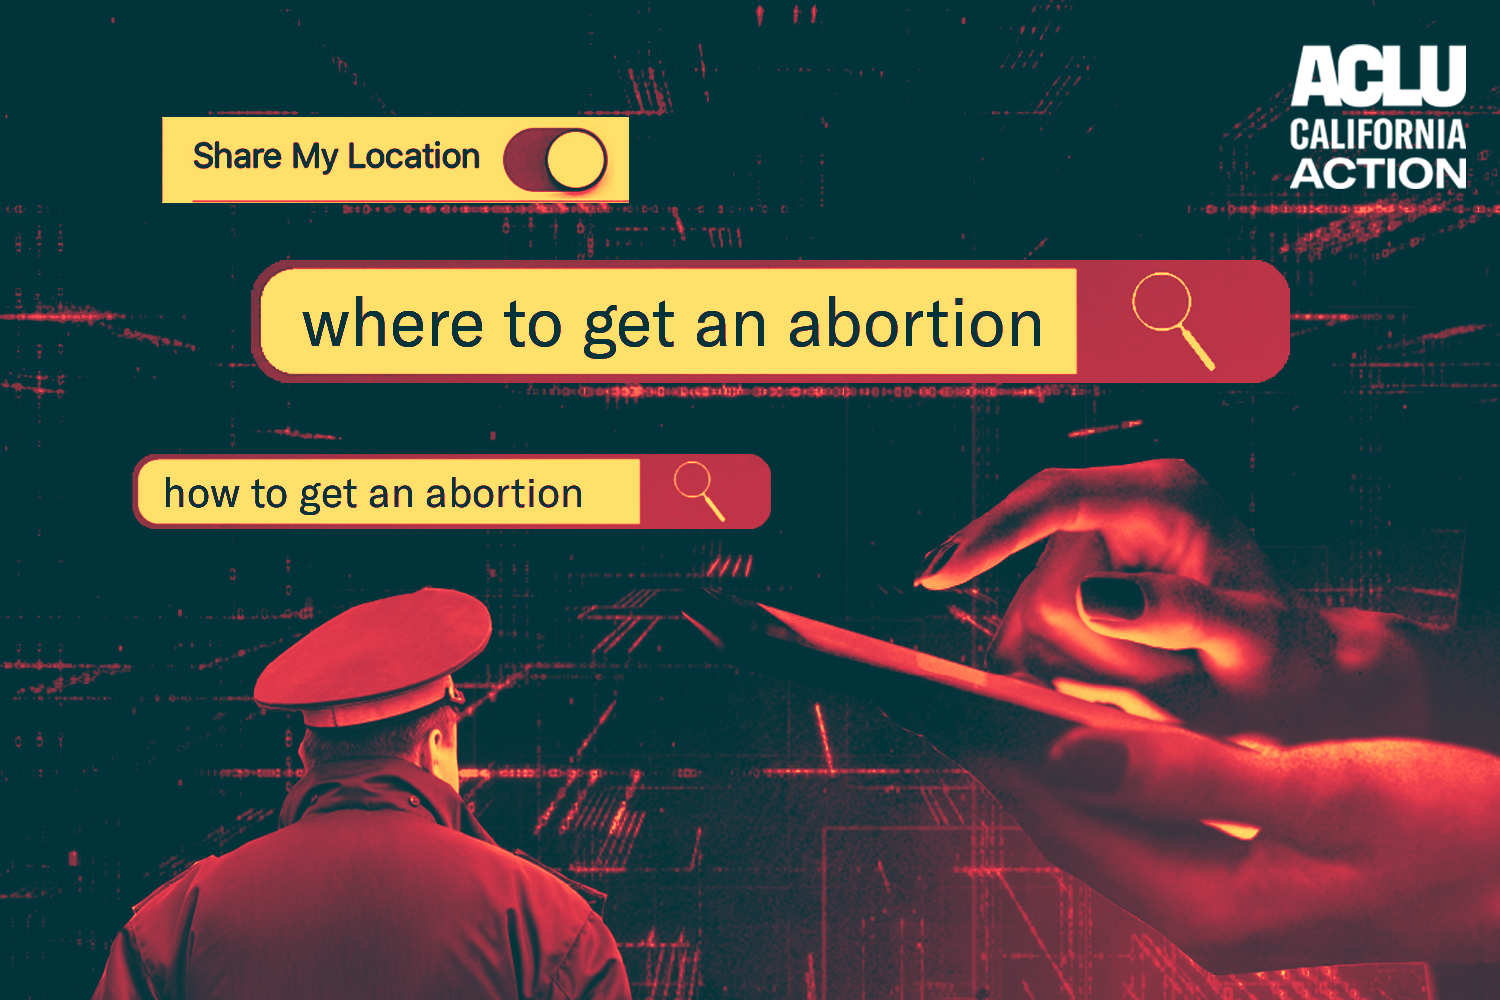 Searching for reproductive care under police surveillance 